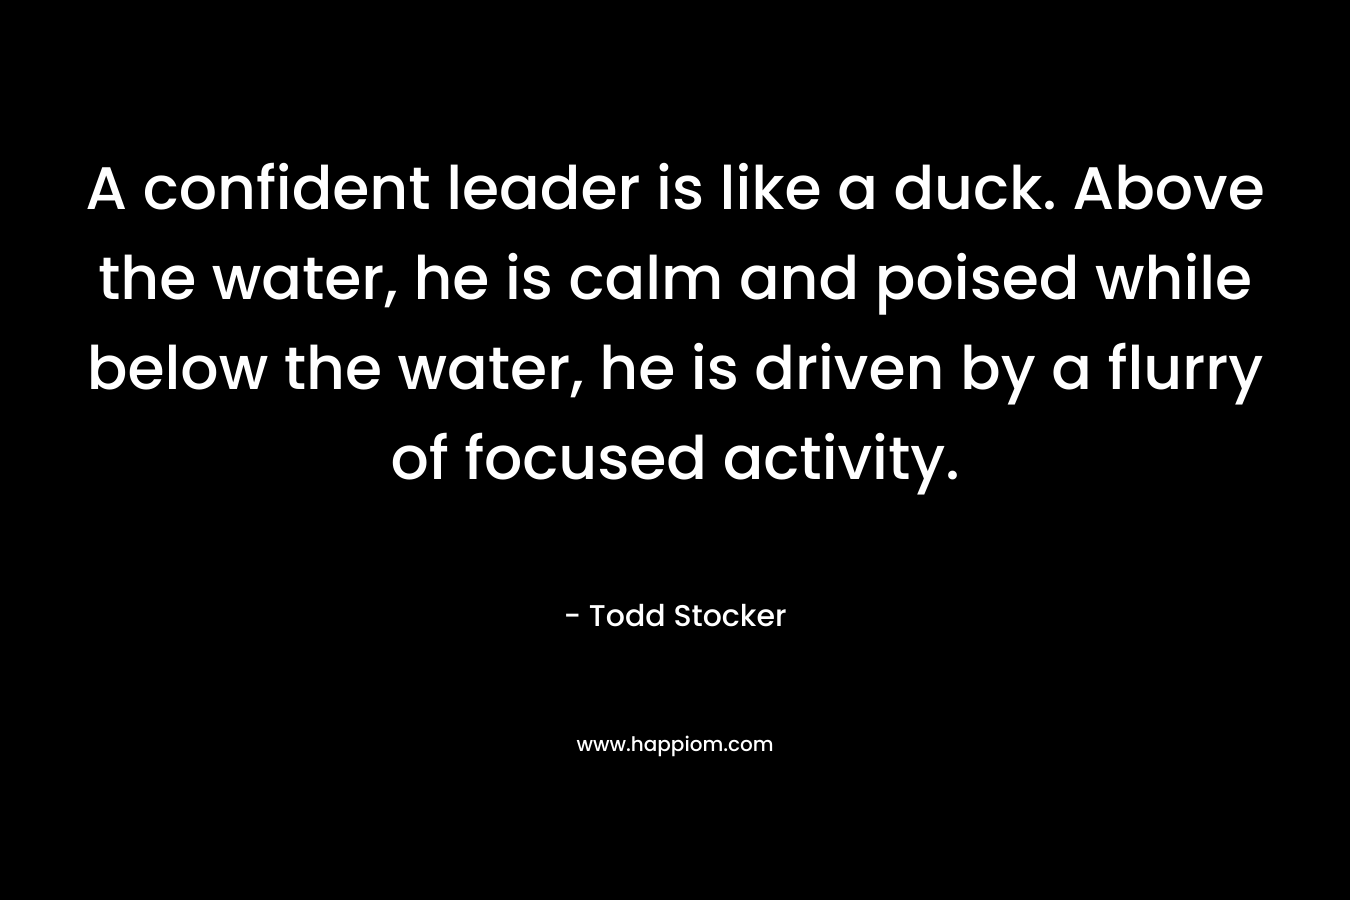 A confident leader is like a duck. Above the water, he is calm and poised while below the water, he is driven by a flurry of focused activity. – Todd Stocker